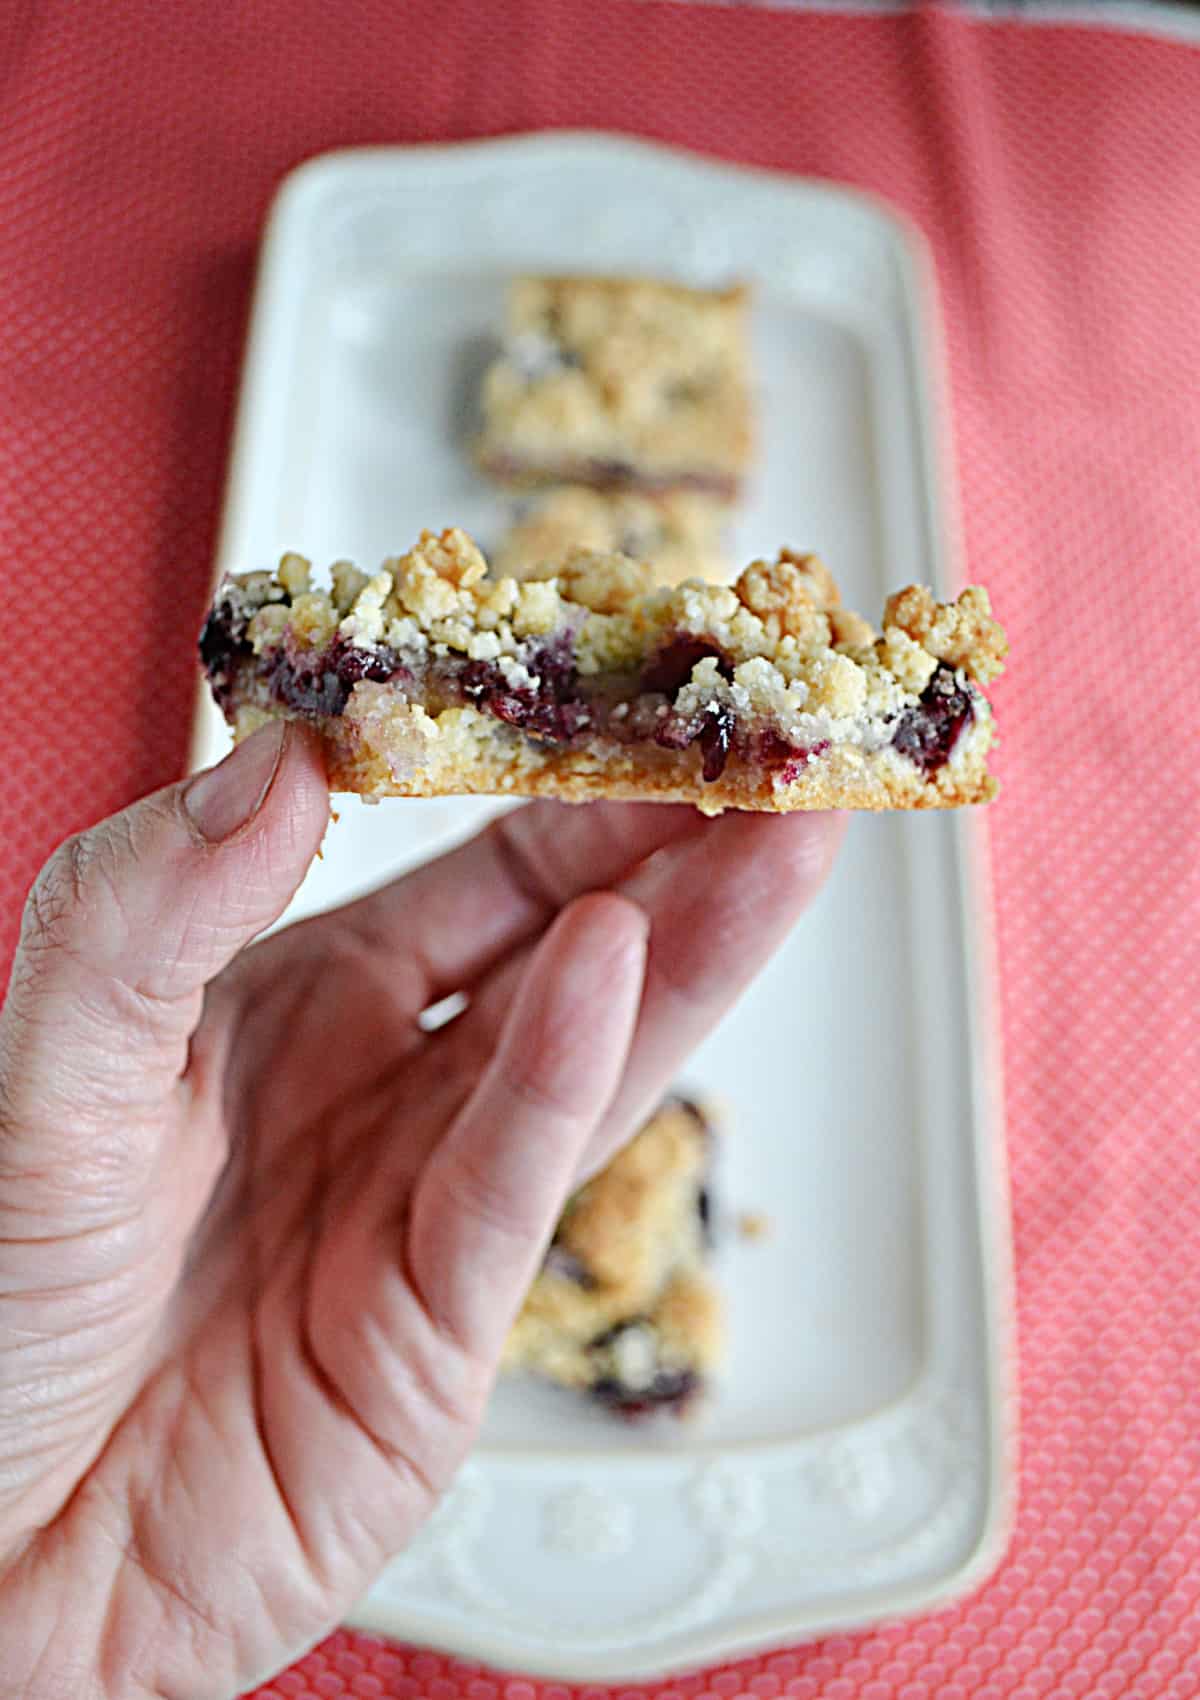 A close up of a hand holding a cherry crumble bar with a bite taken out of it.